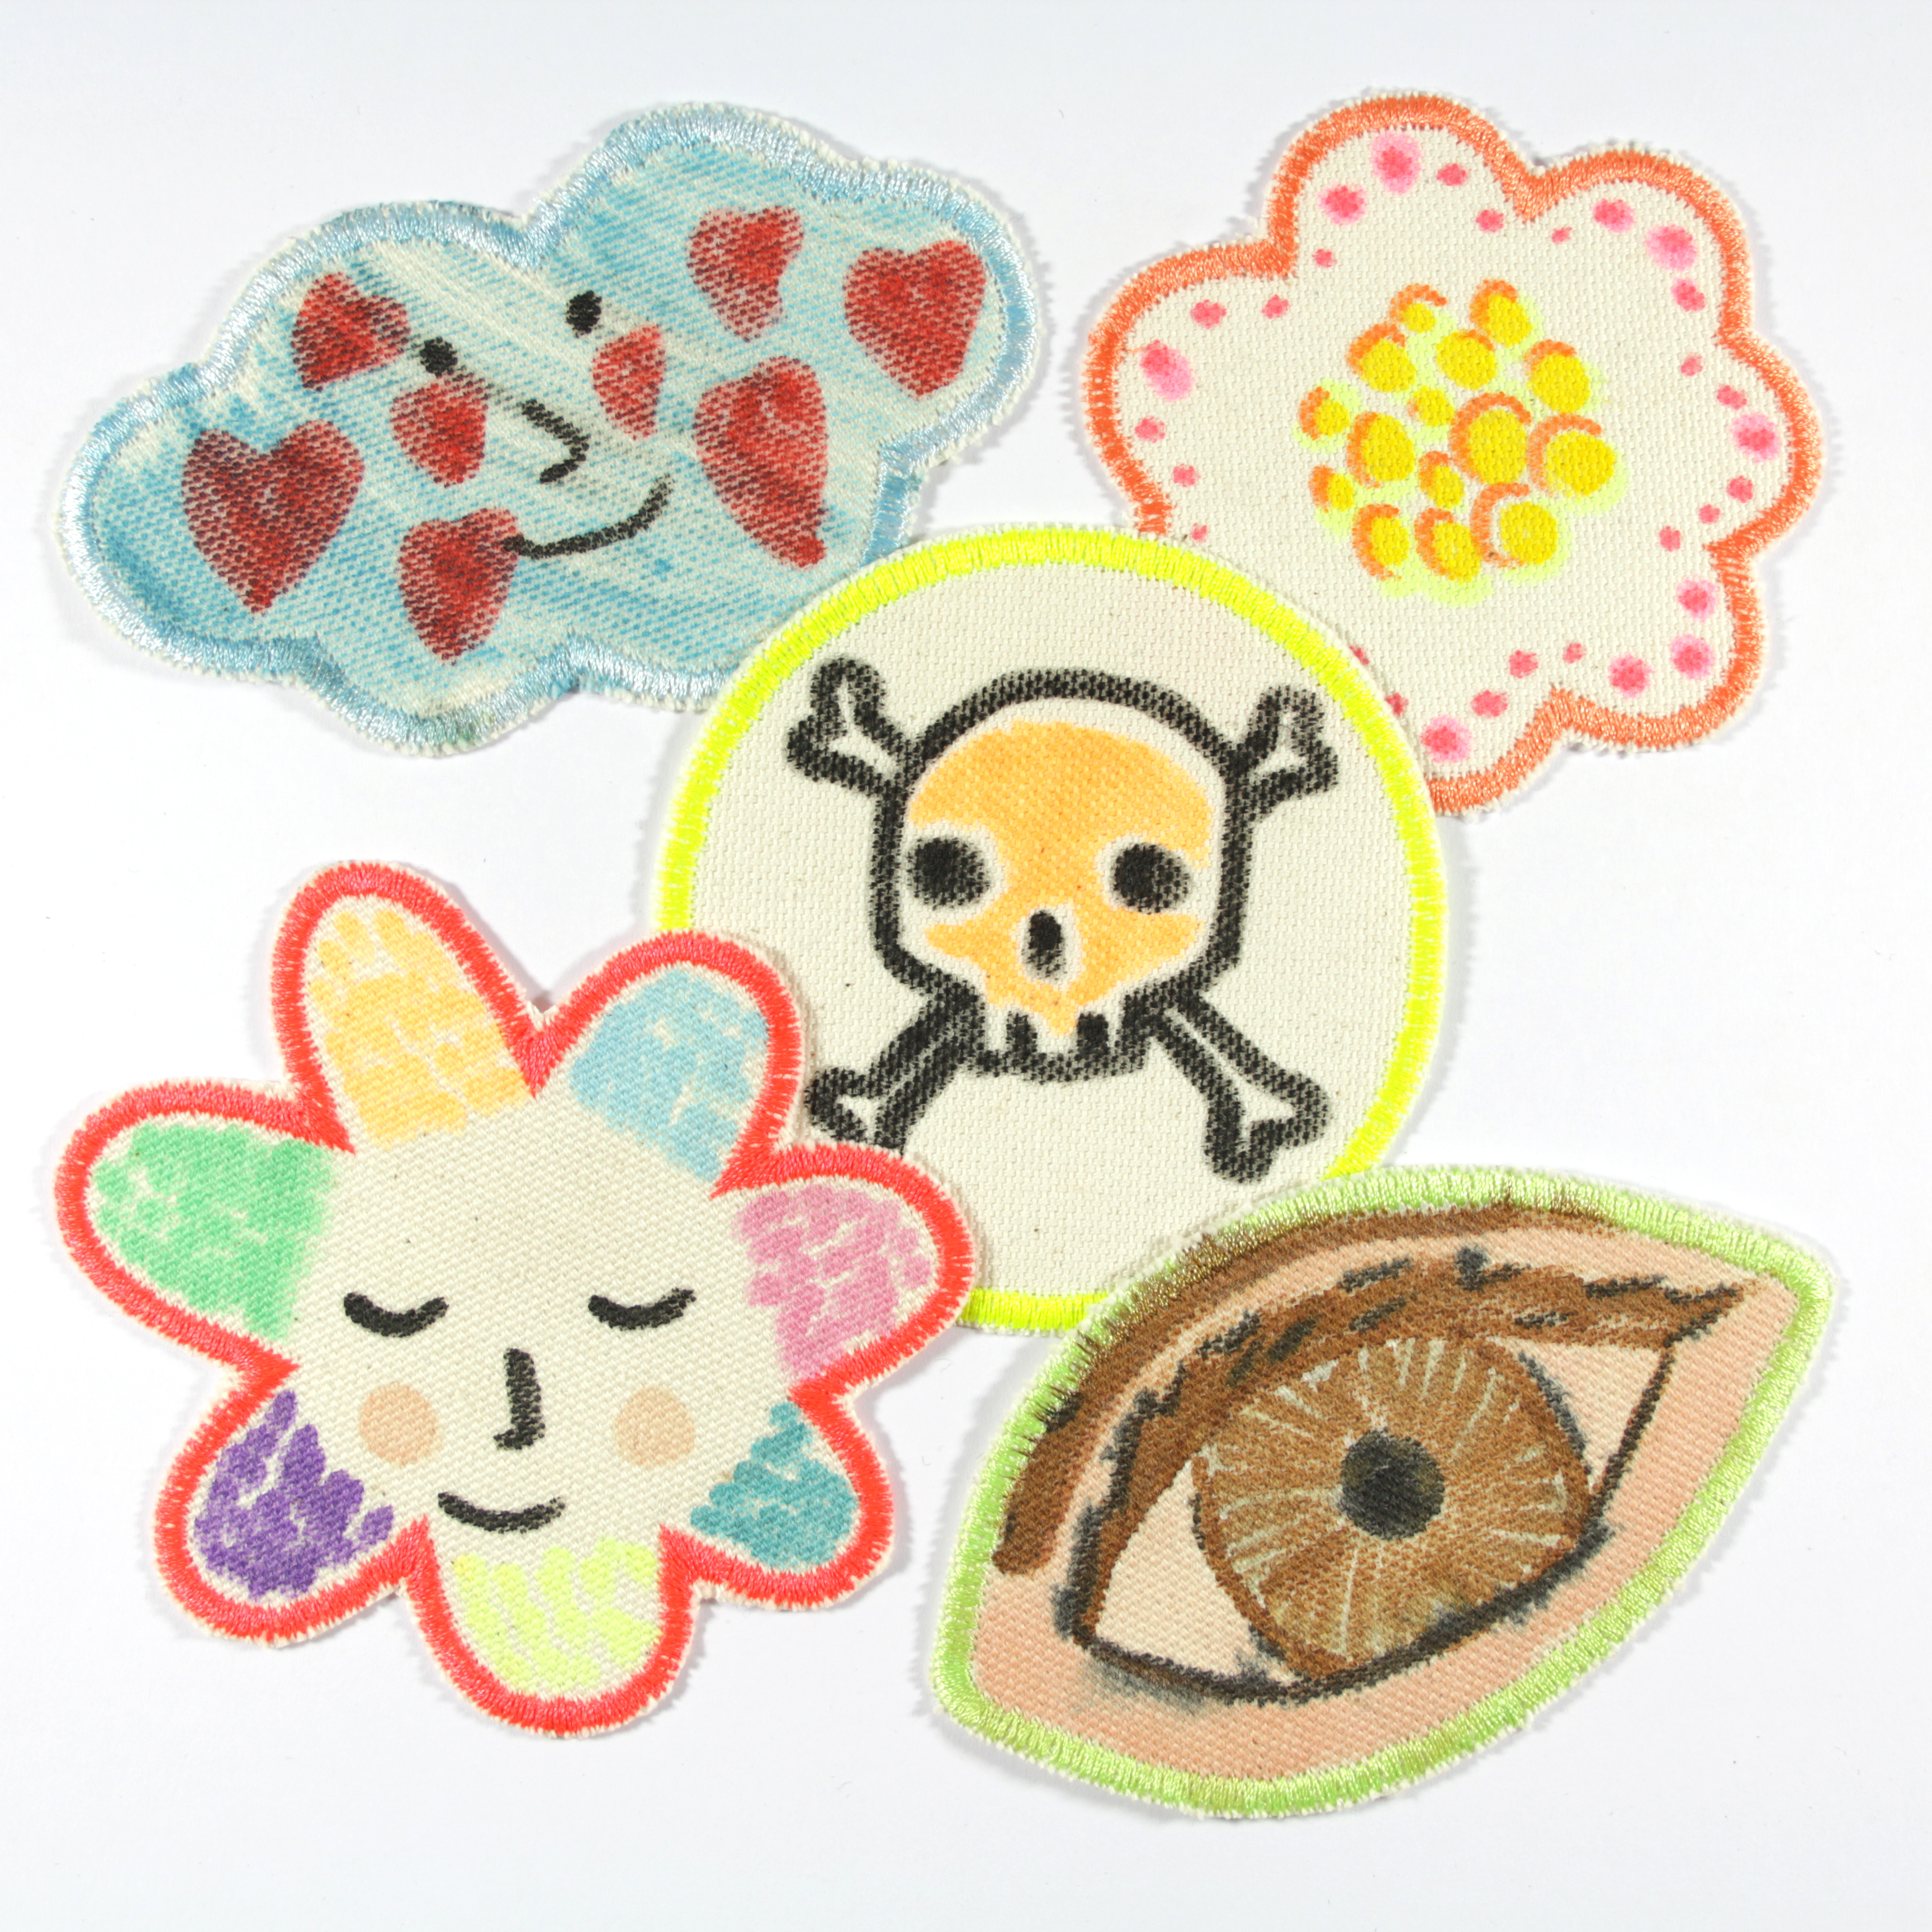 DIY set of 5 blank iron-on patches for painting set variant 1